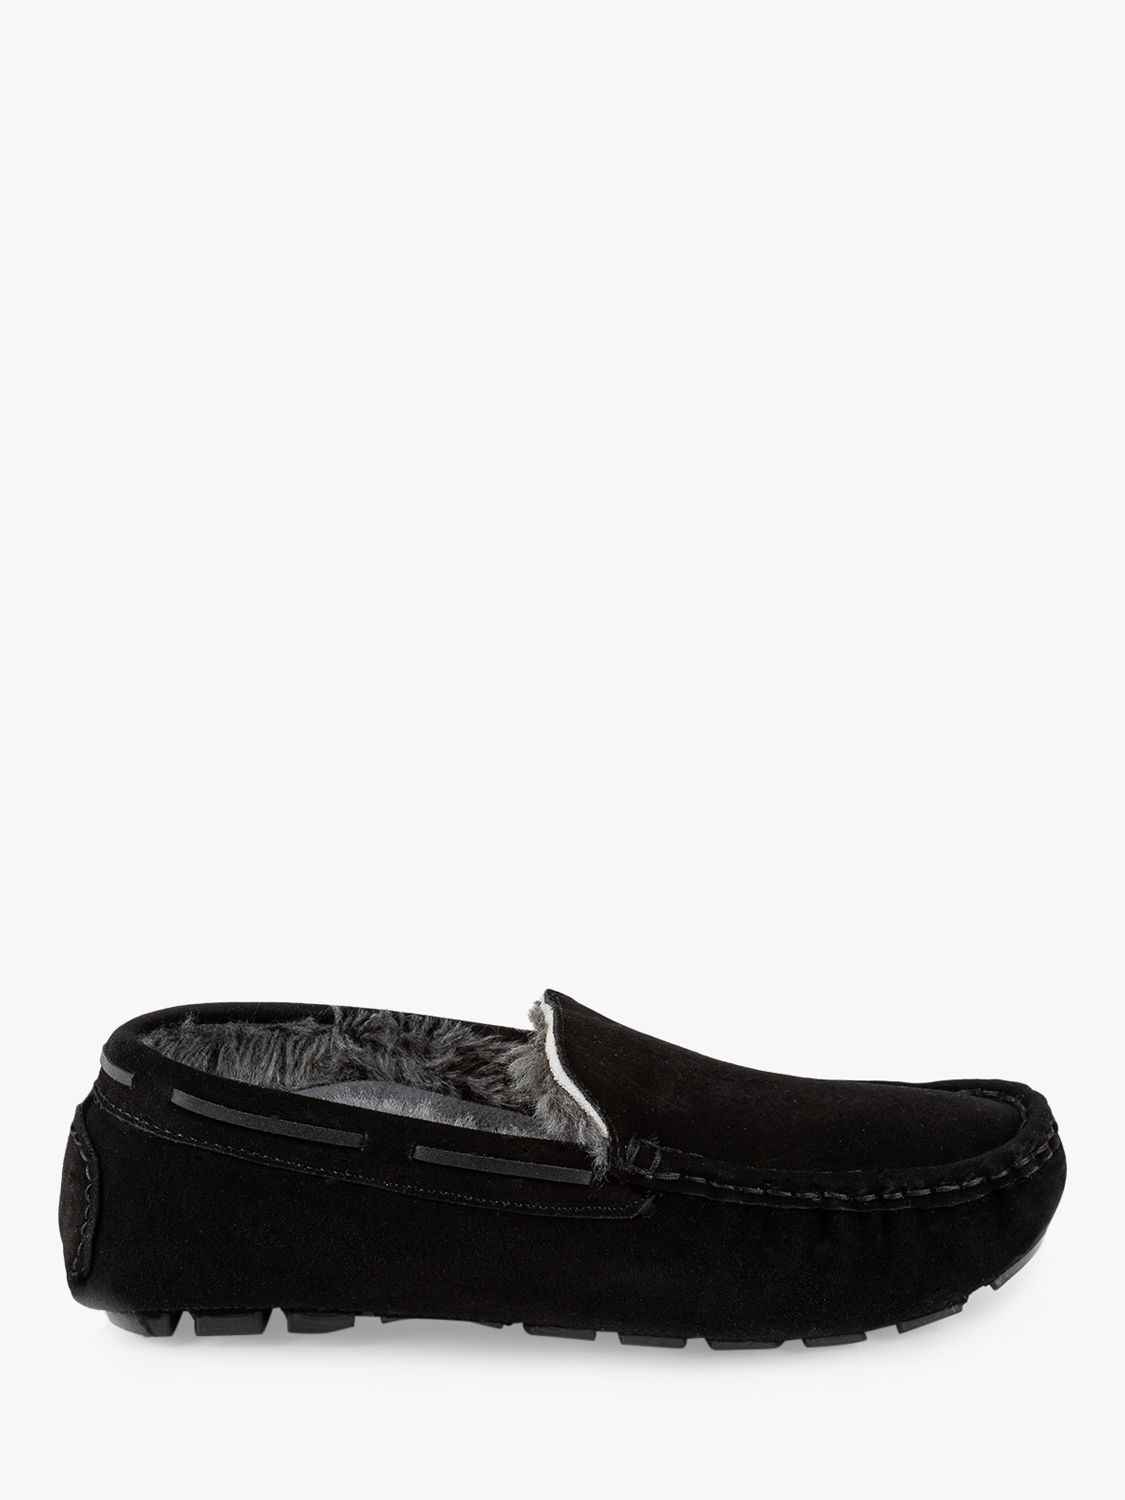 totes Isotoner Suede Moccasin Slippers, Black, 8